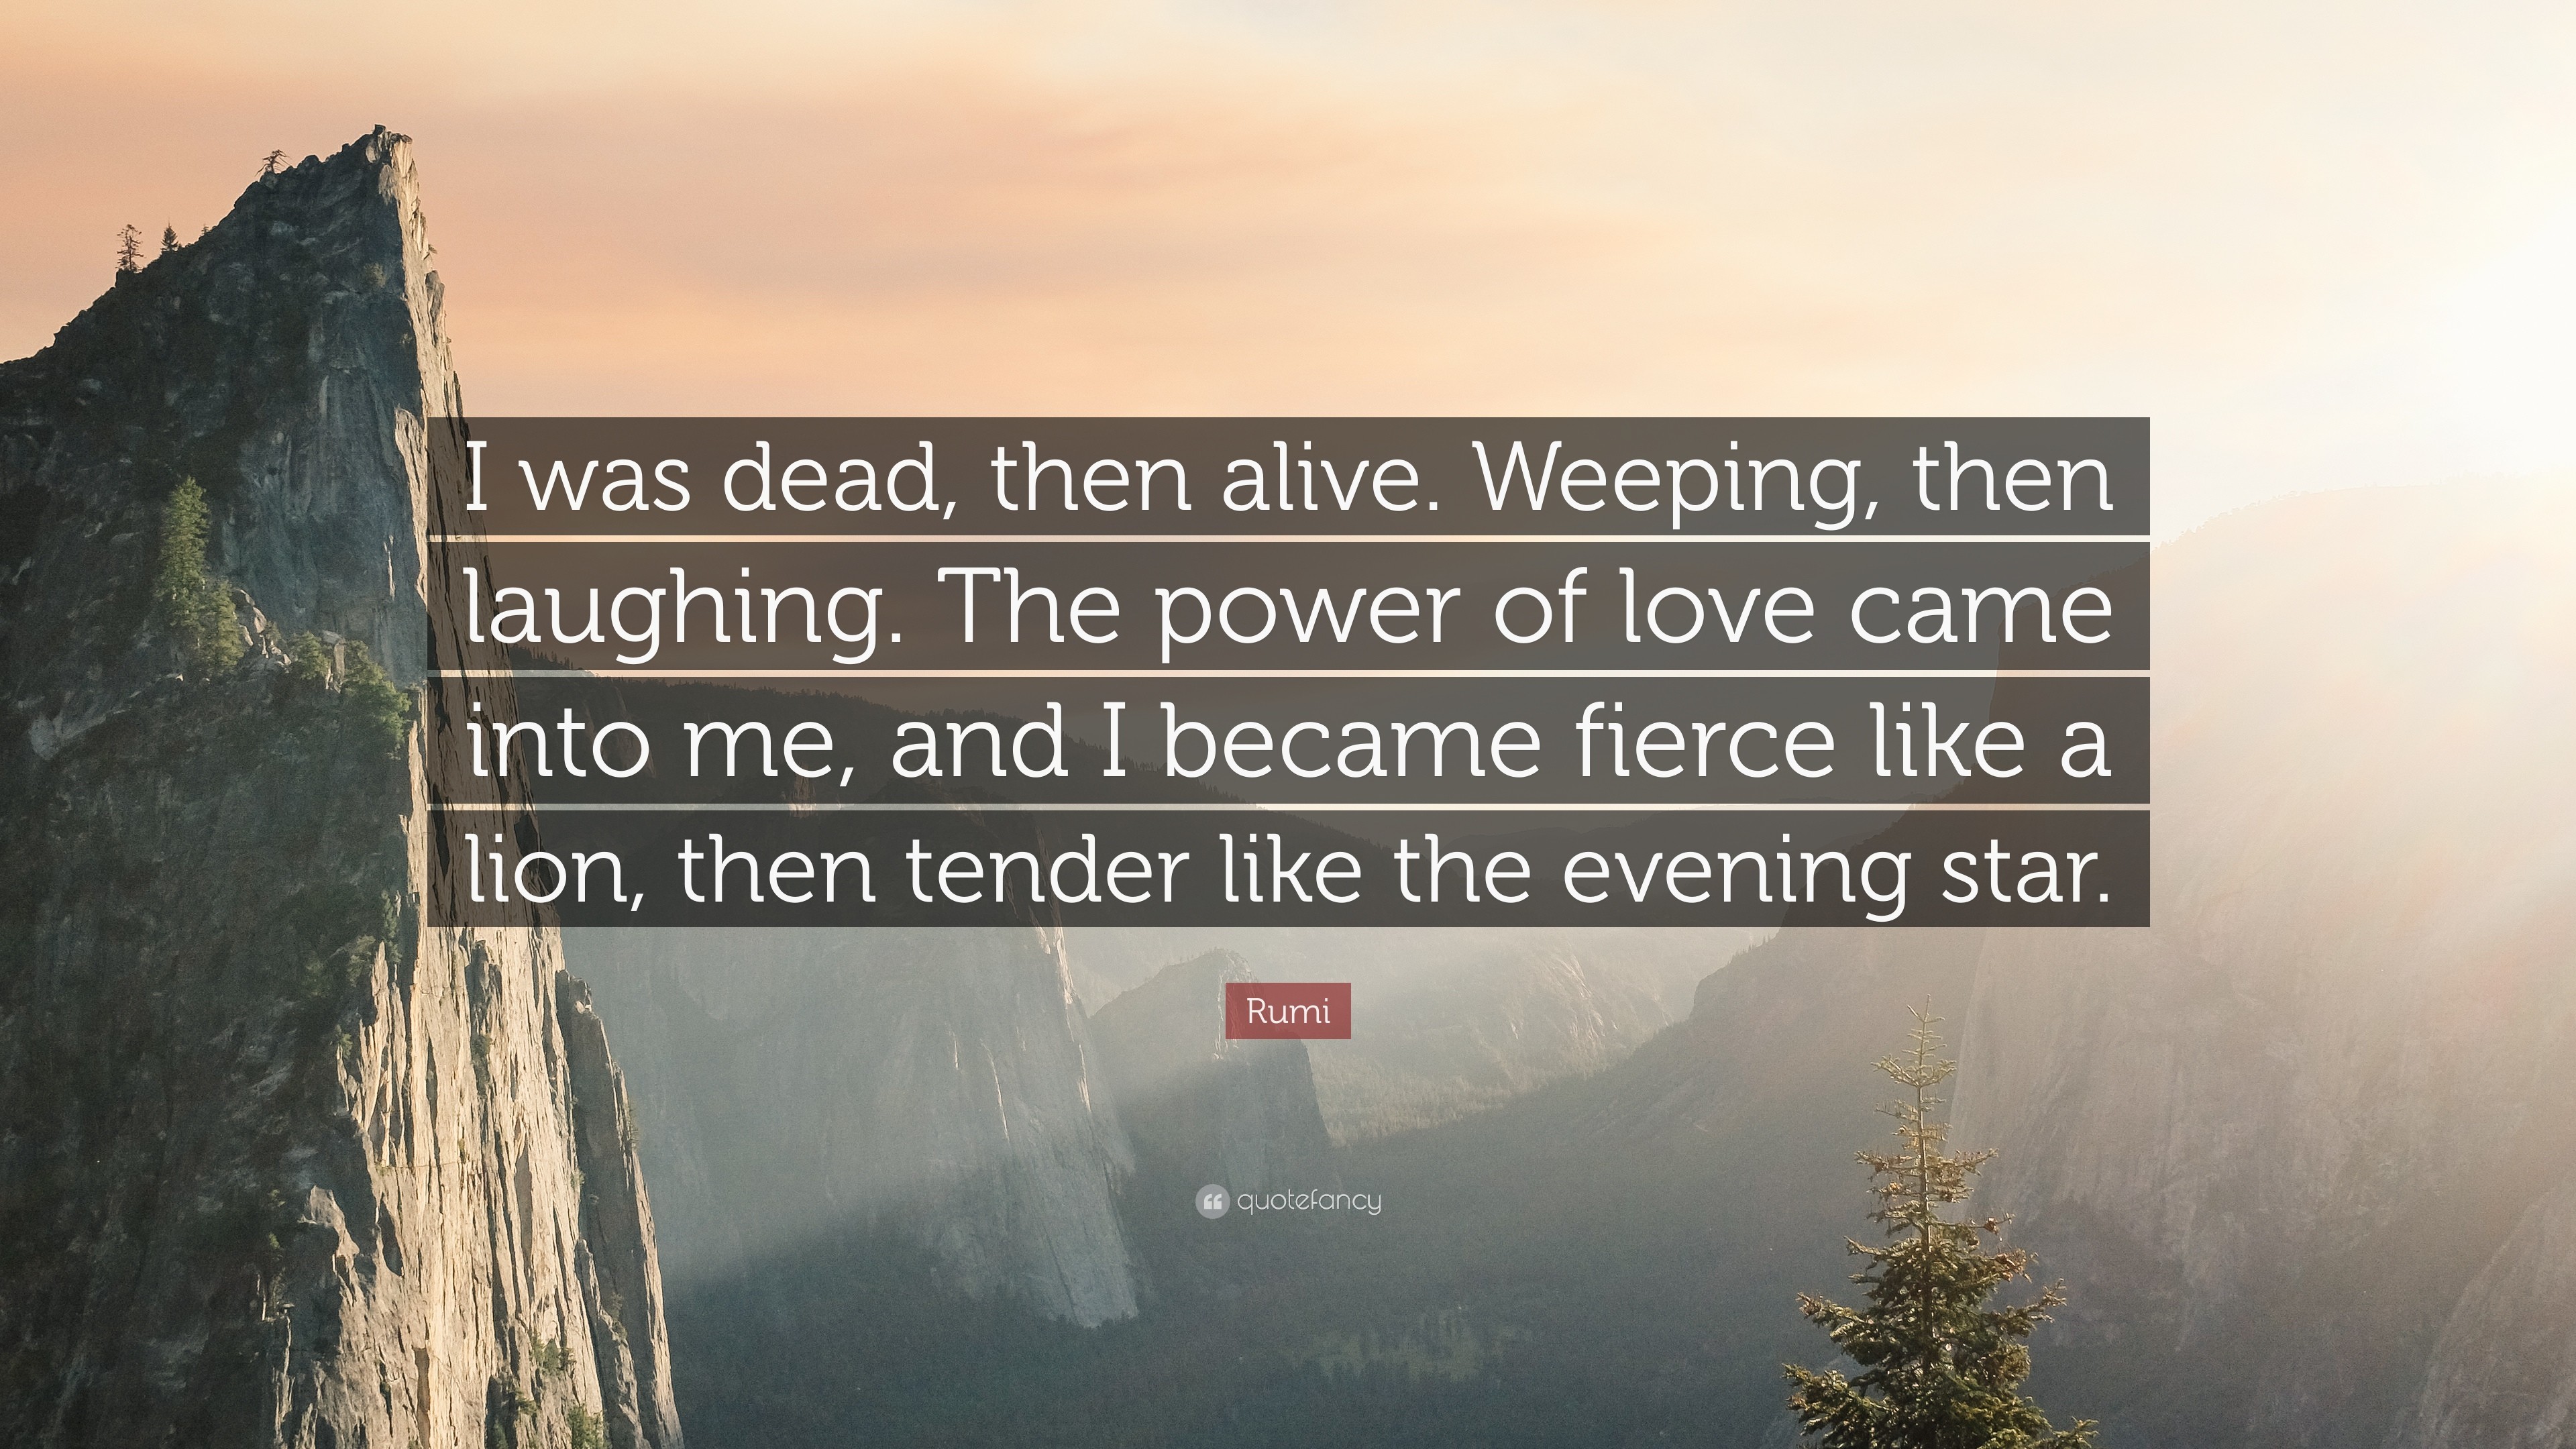 3840x2160 Quotes About Laughing: “I was dead, then alive. Weeping, then laughing